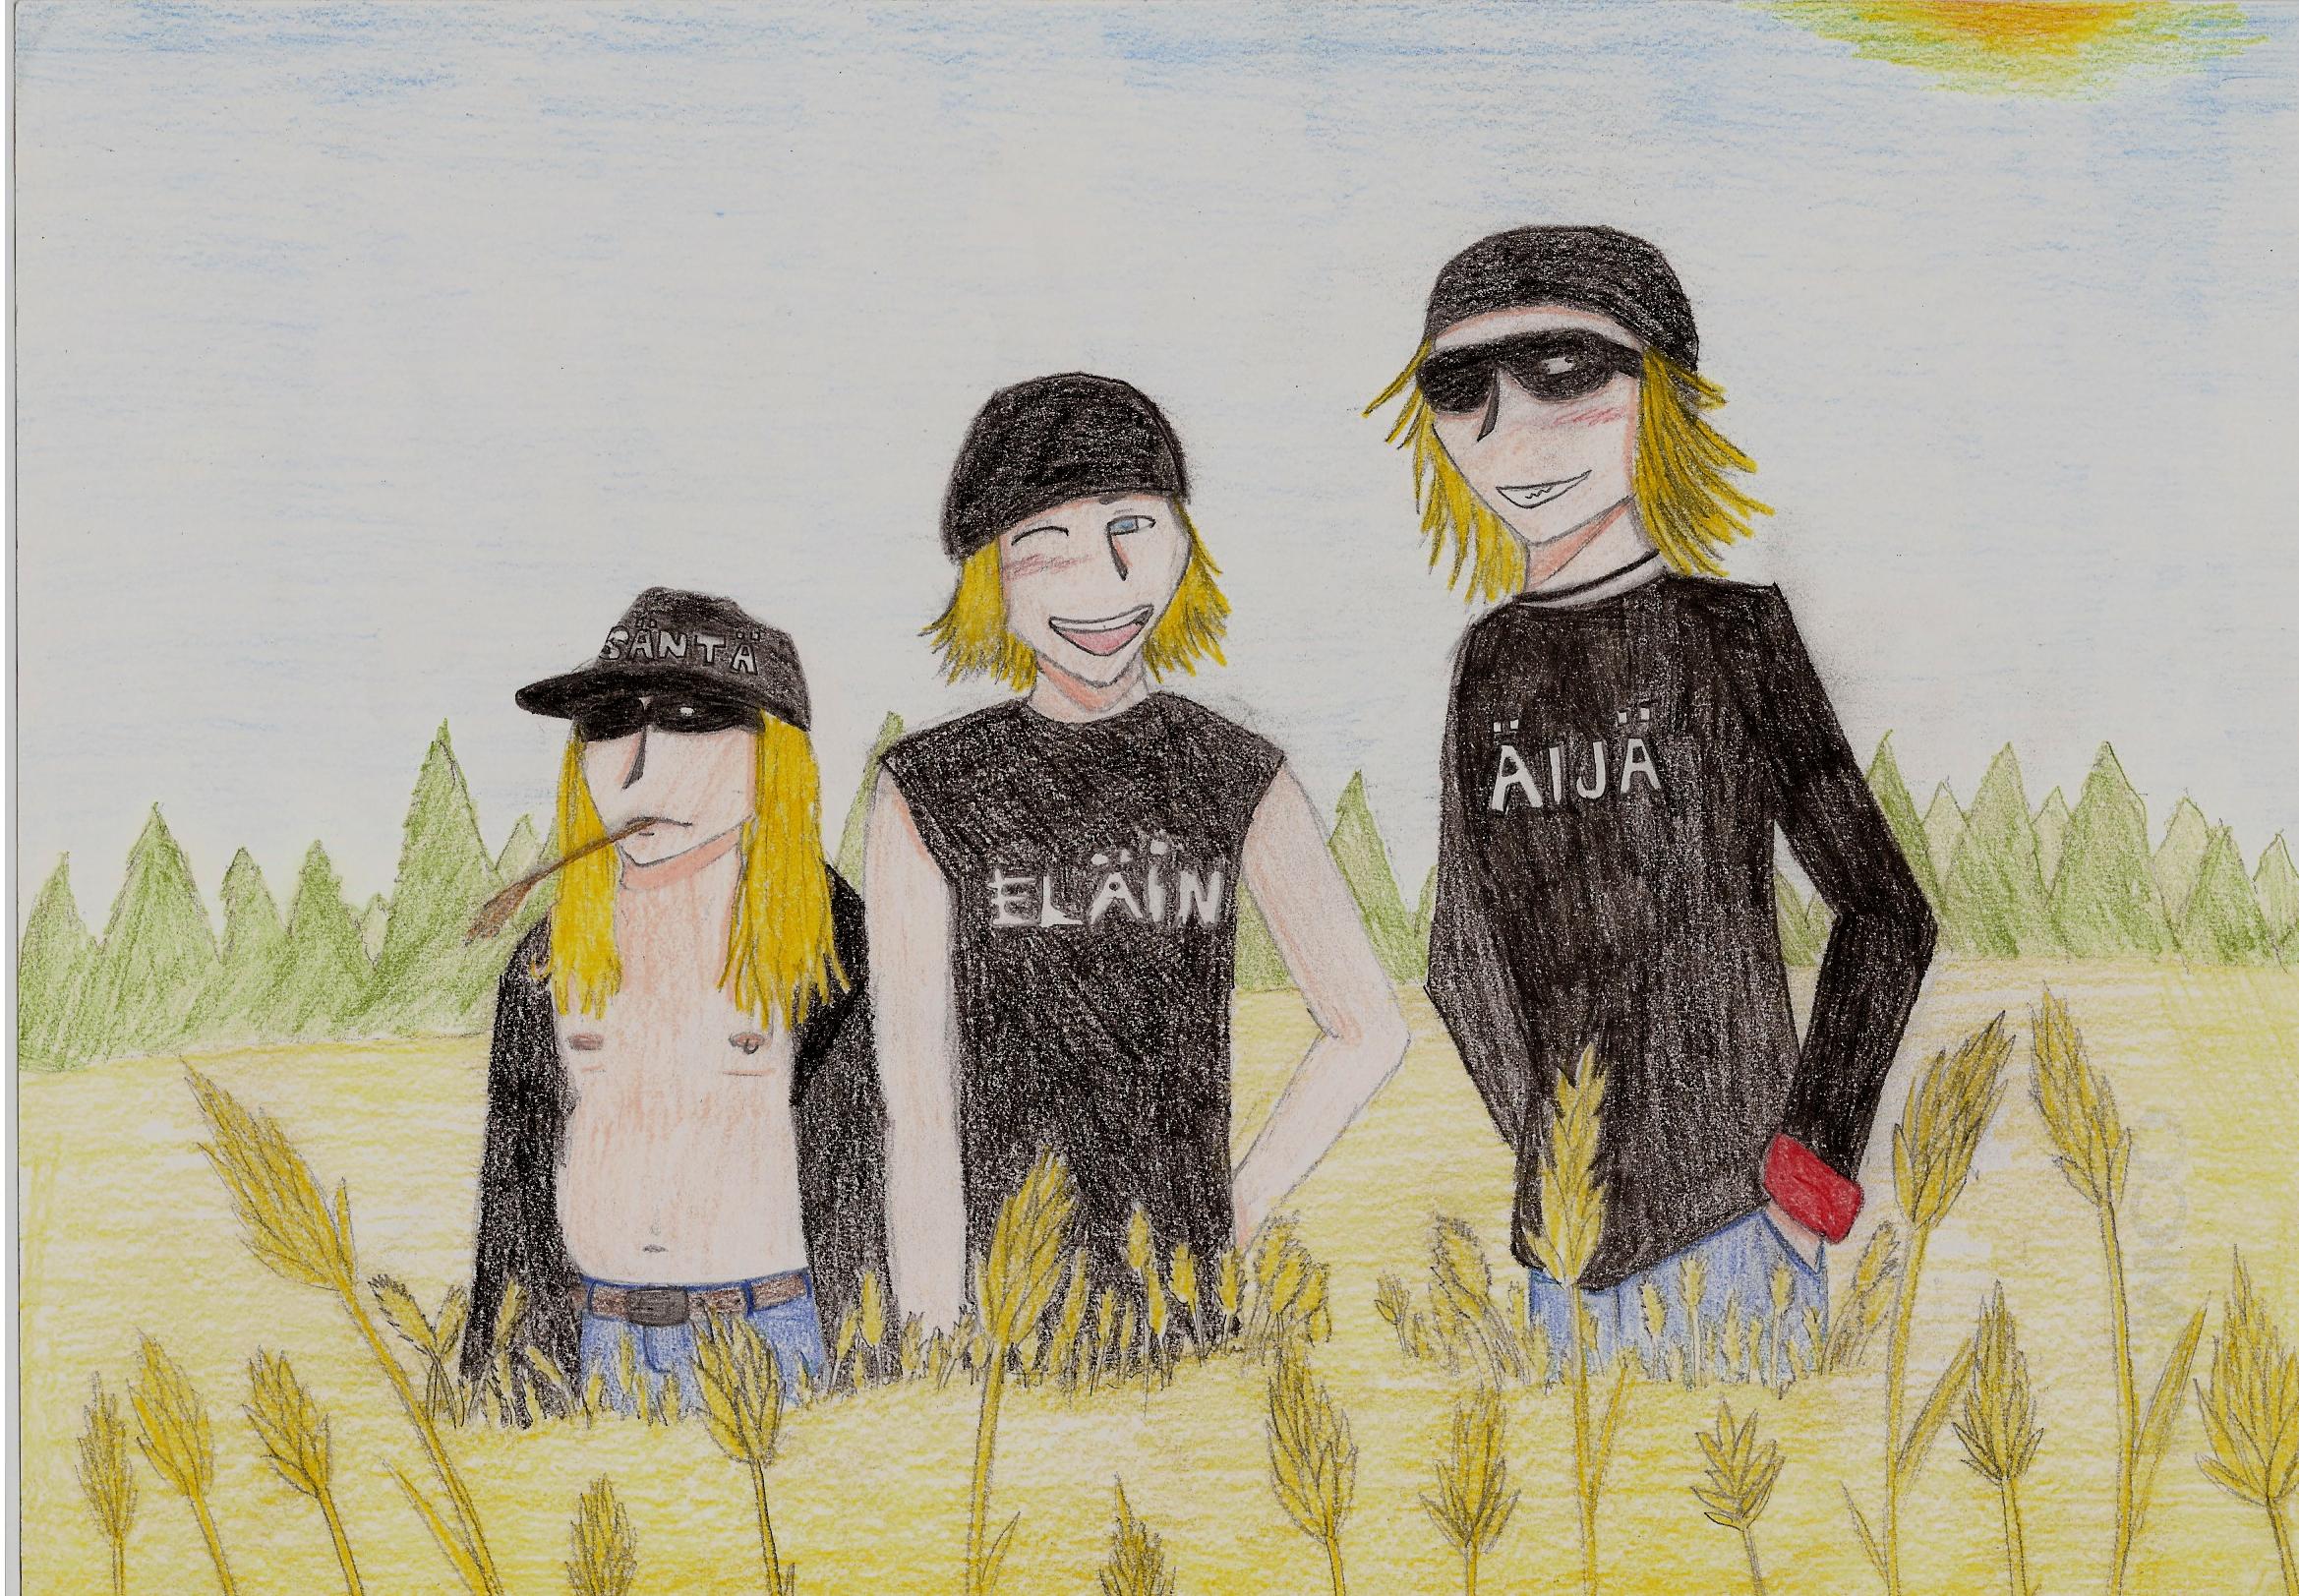 The Dudesons by stupot